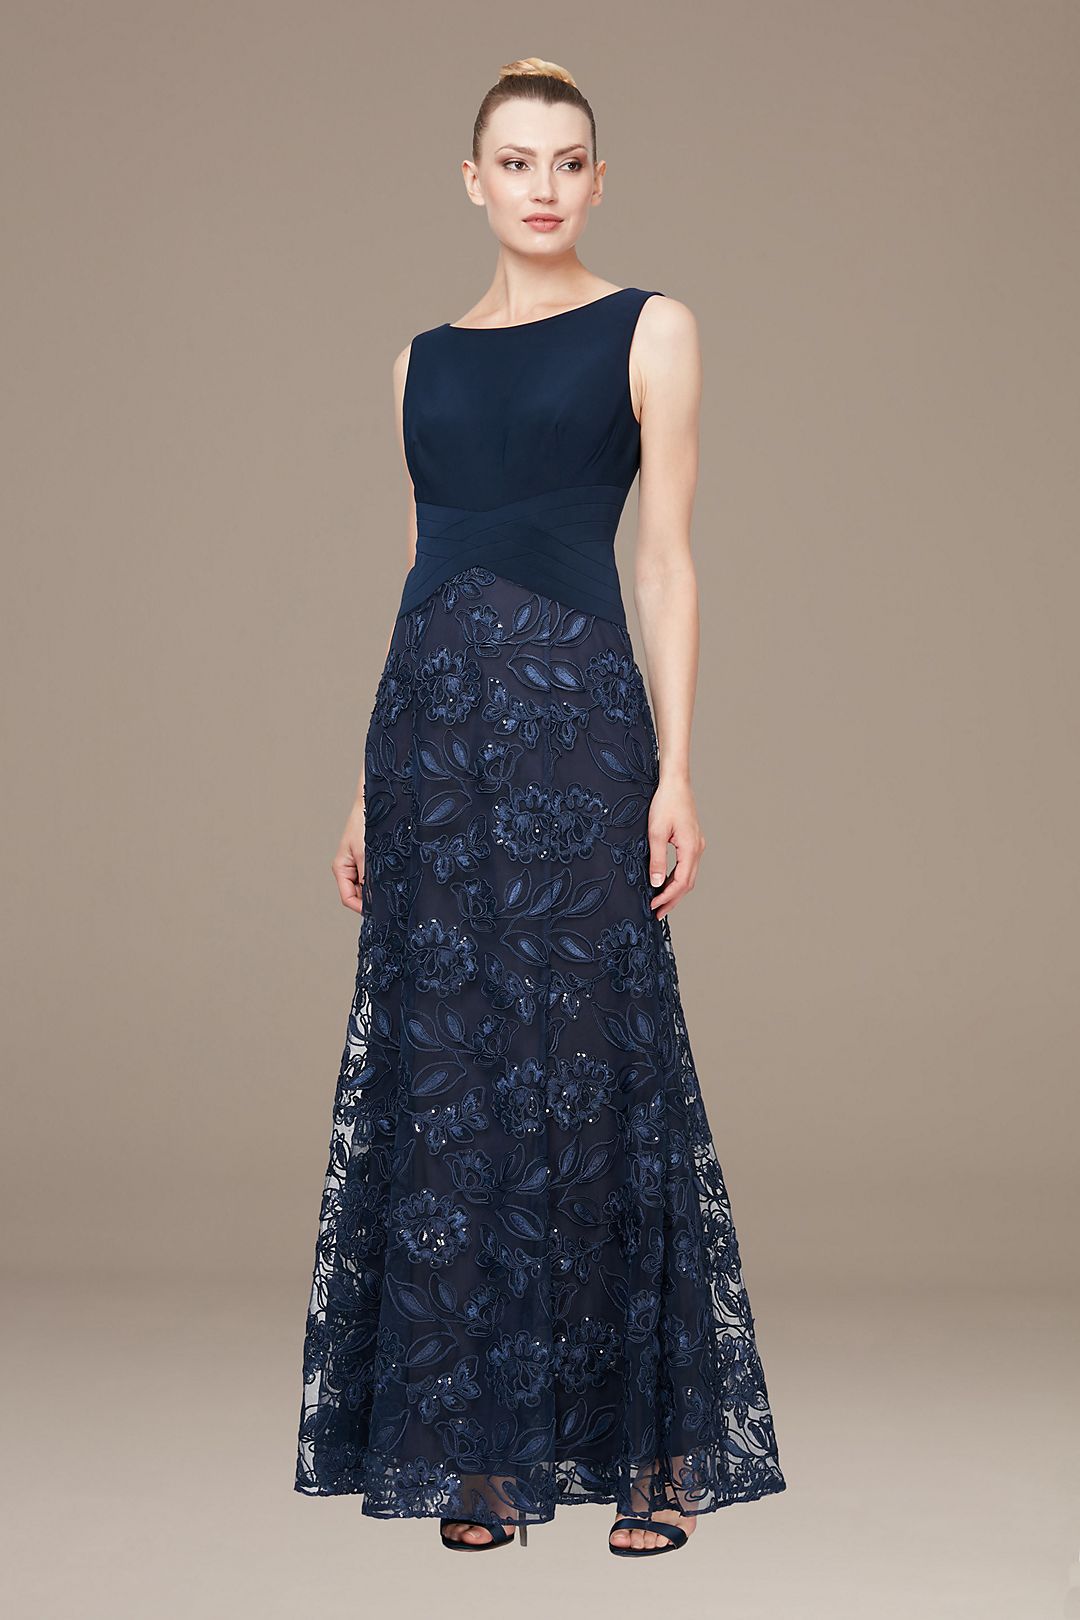 Sleeveless Gown with Embroidered Lace Skirt Image 1